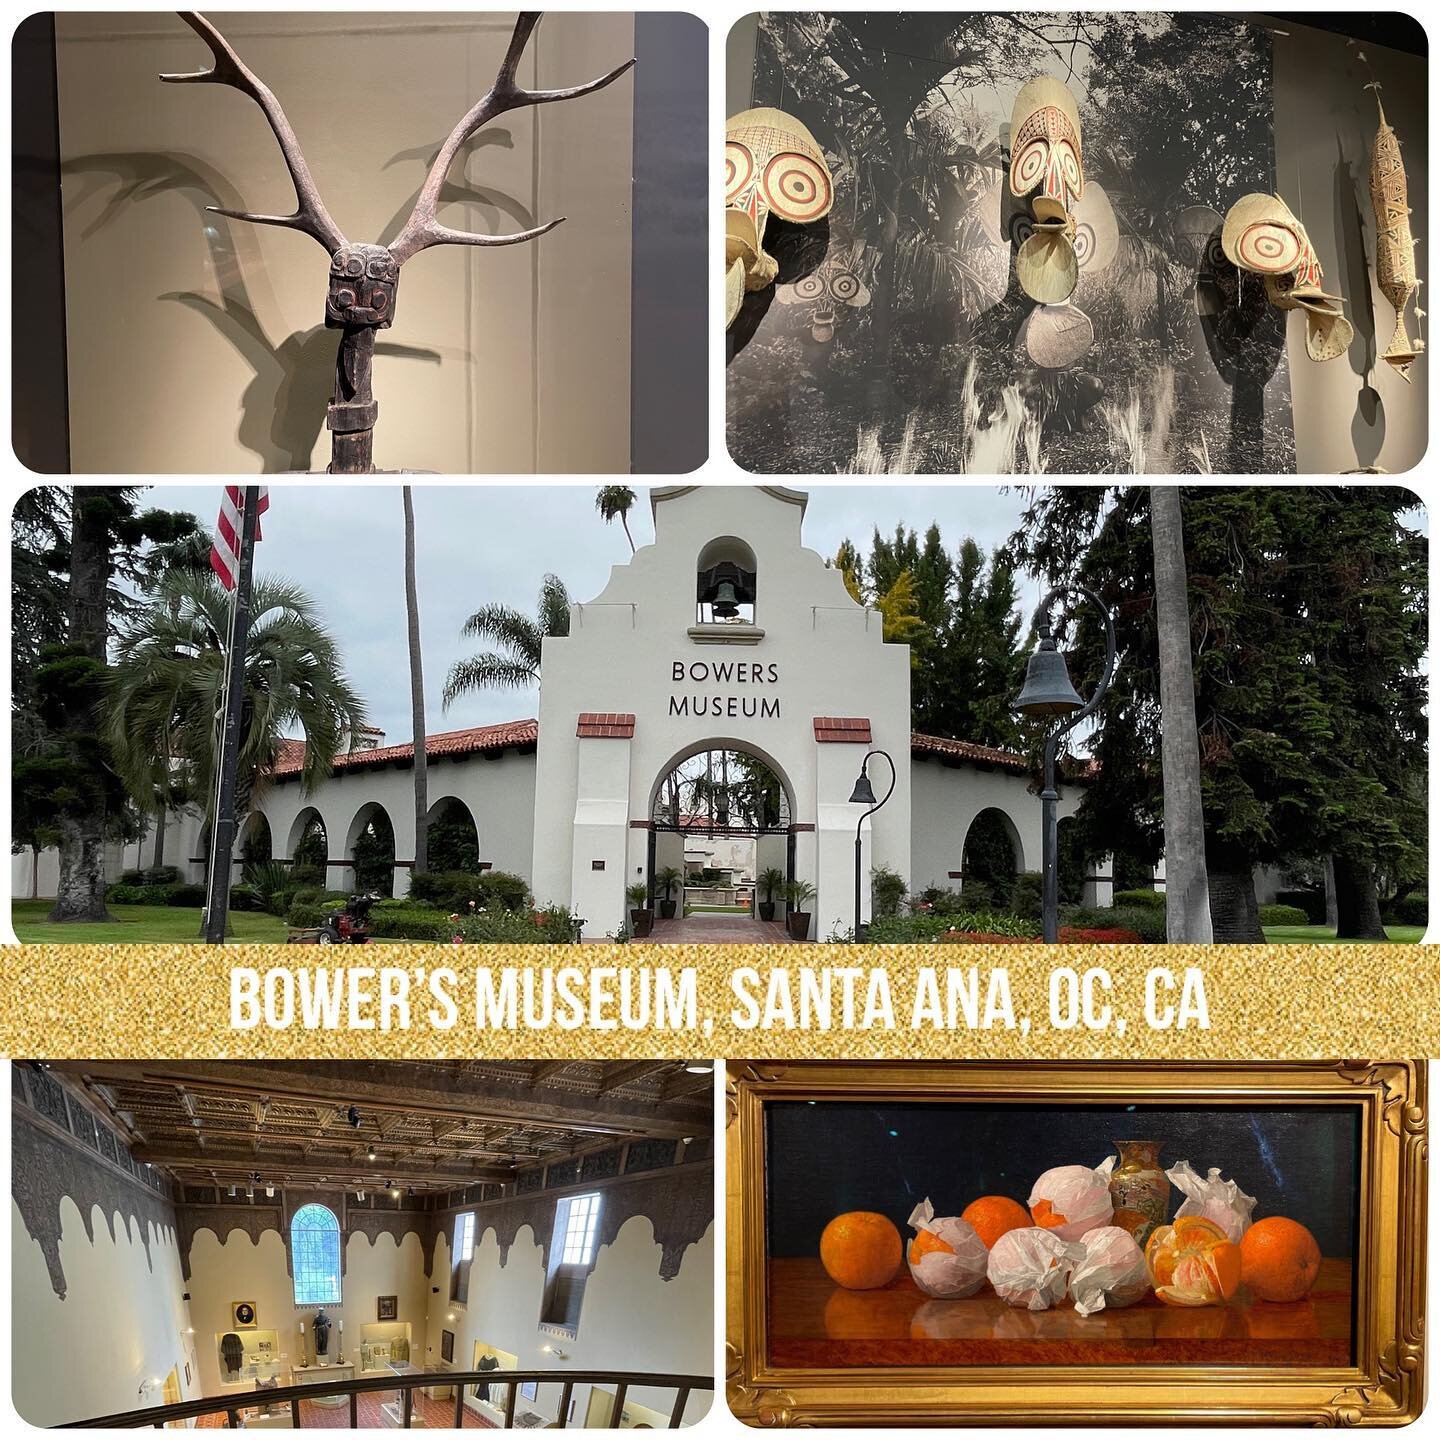 Had an edifying time walking through the #bowersmuseum #santaanacalifornia Found a #HanDynasty #TombWarrior, #southpacific #headhunters #masks, preserved #SpanishMission ceiling &amp; #superb #paintings depicting the #county&rsquo;s #bounty. #travels